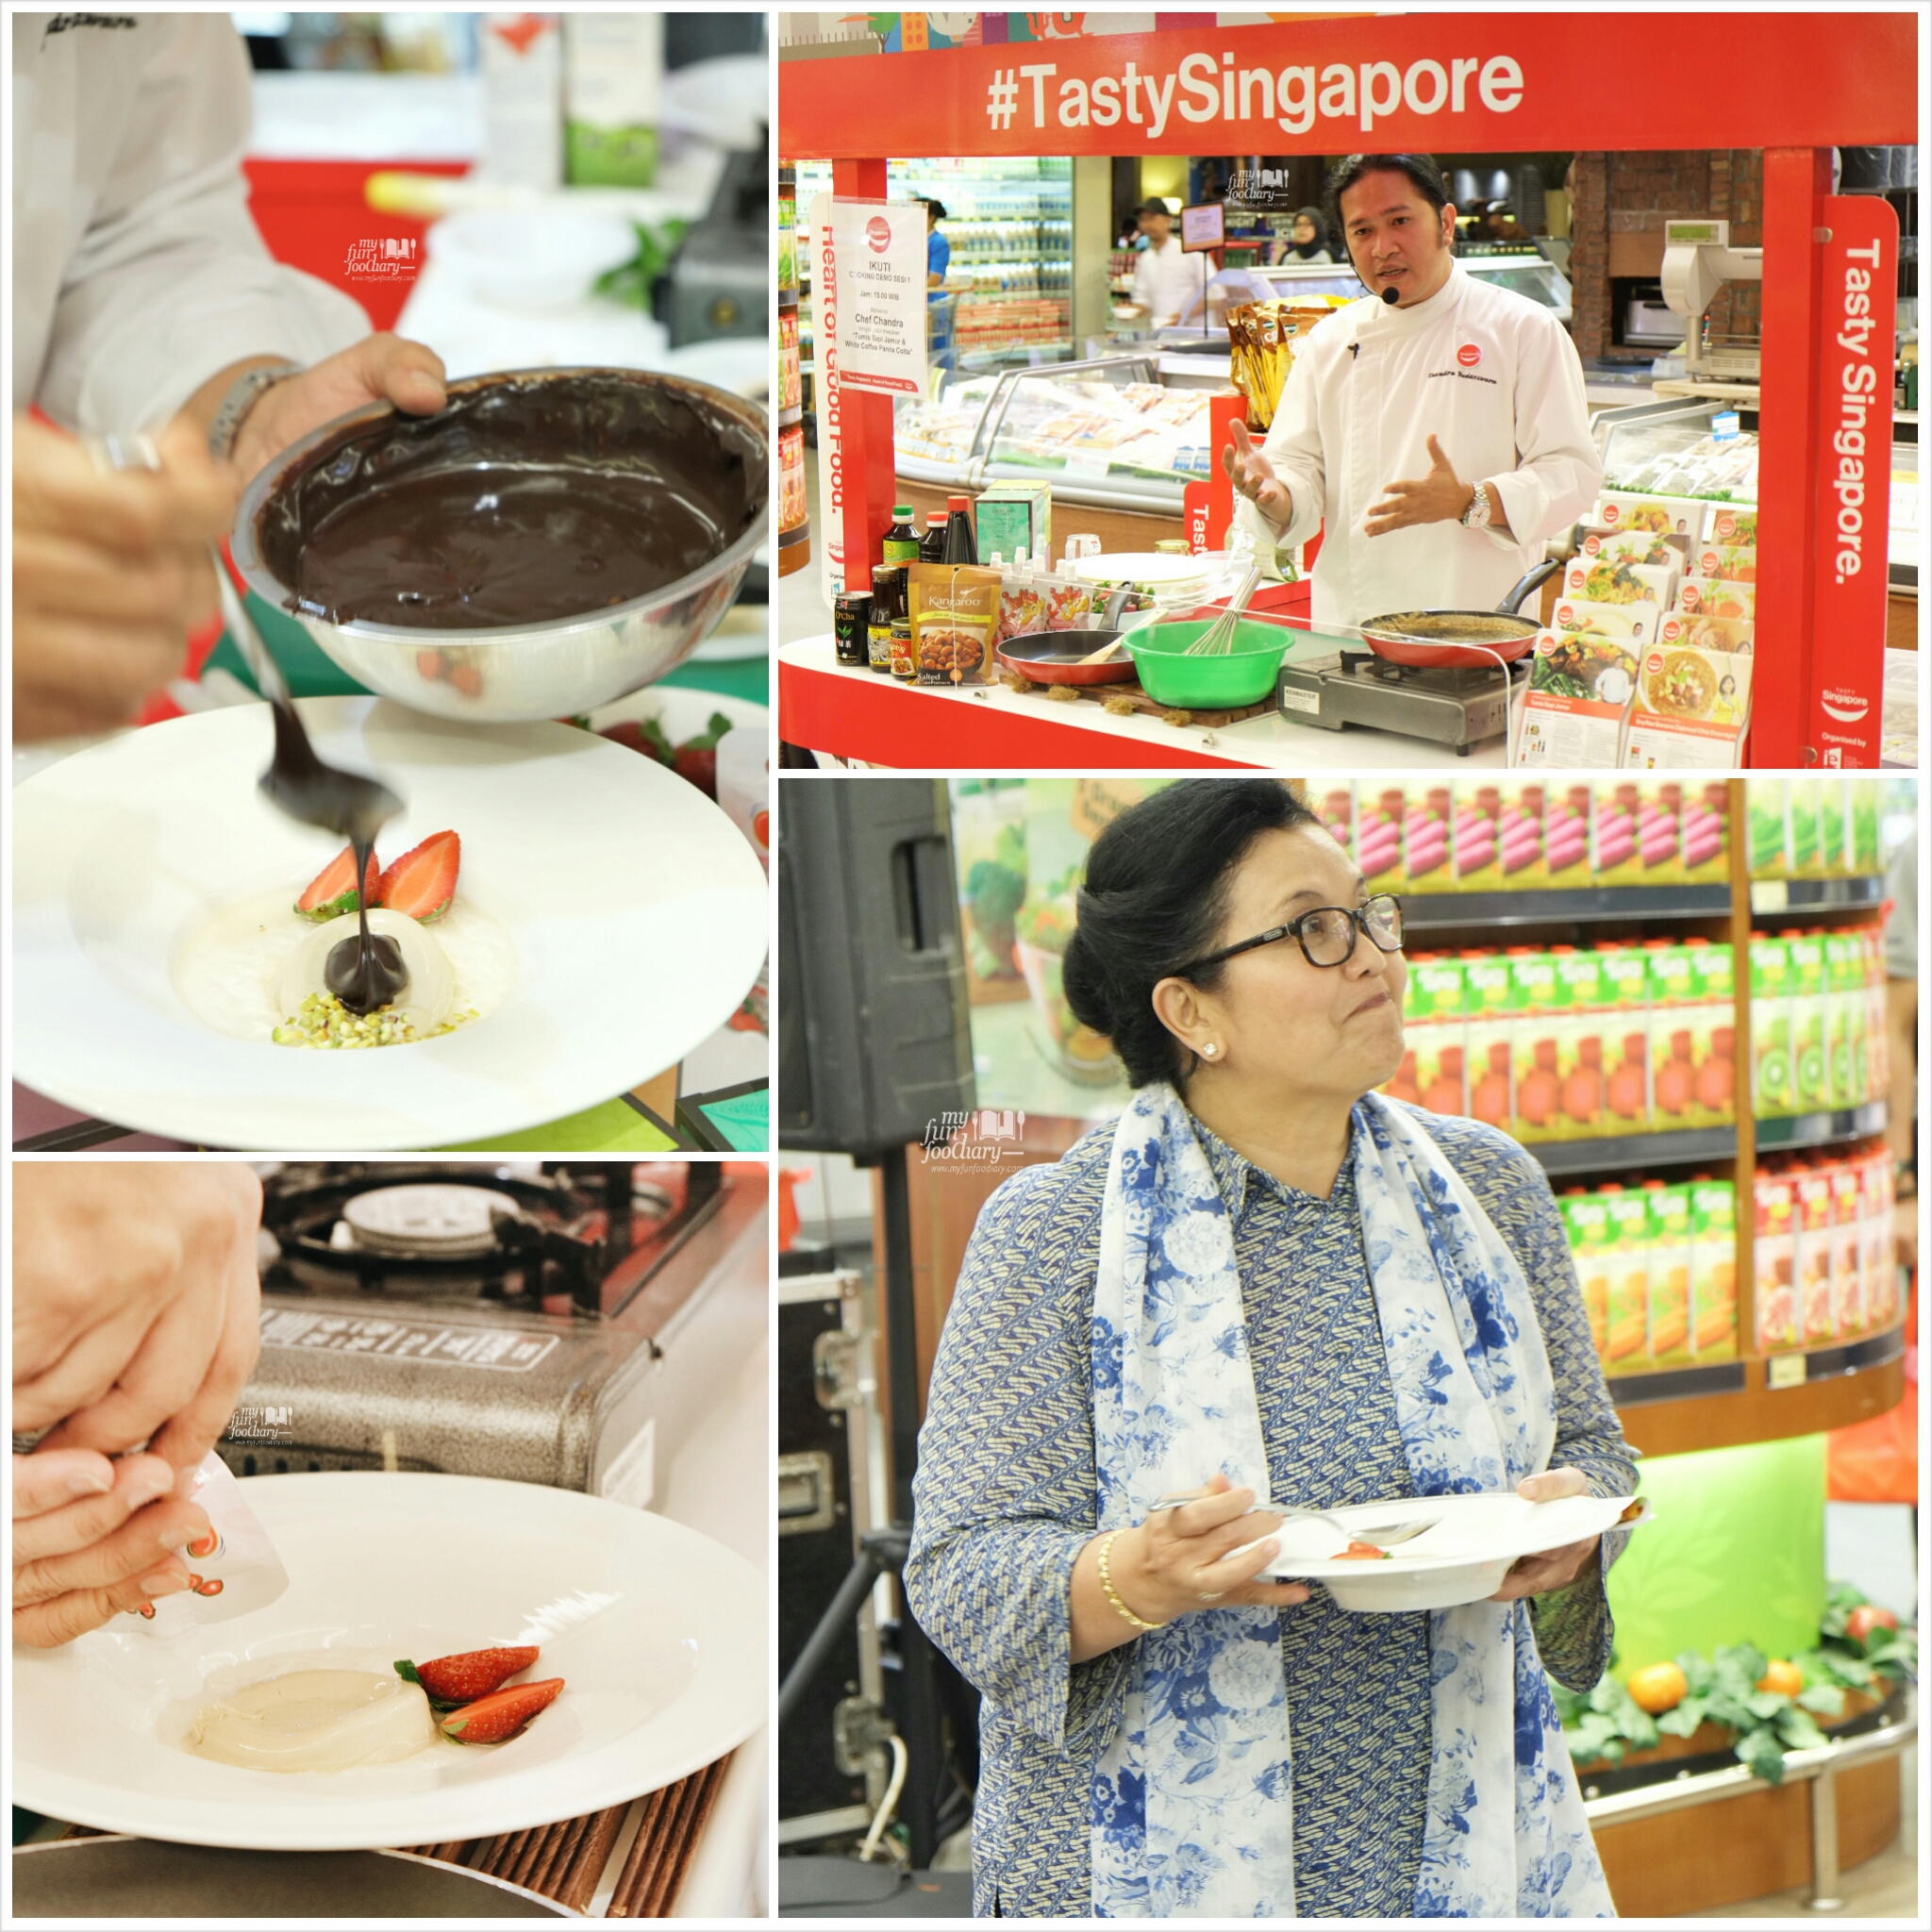 First Cooking Demo by Chef Chandra - by Myfunfoodiary